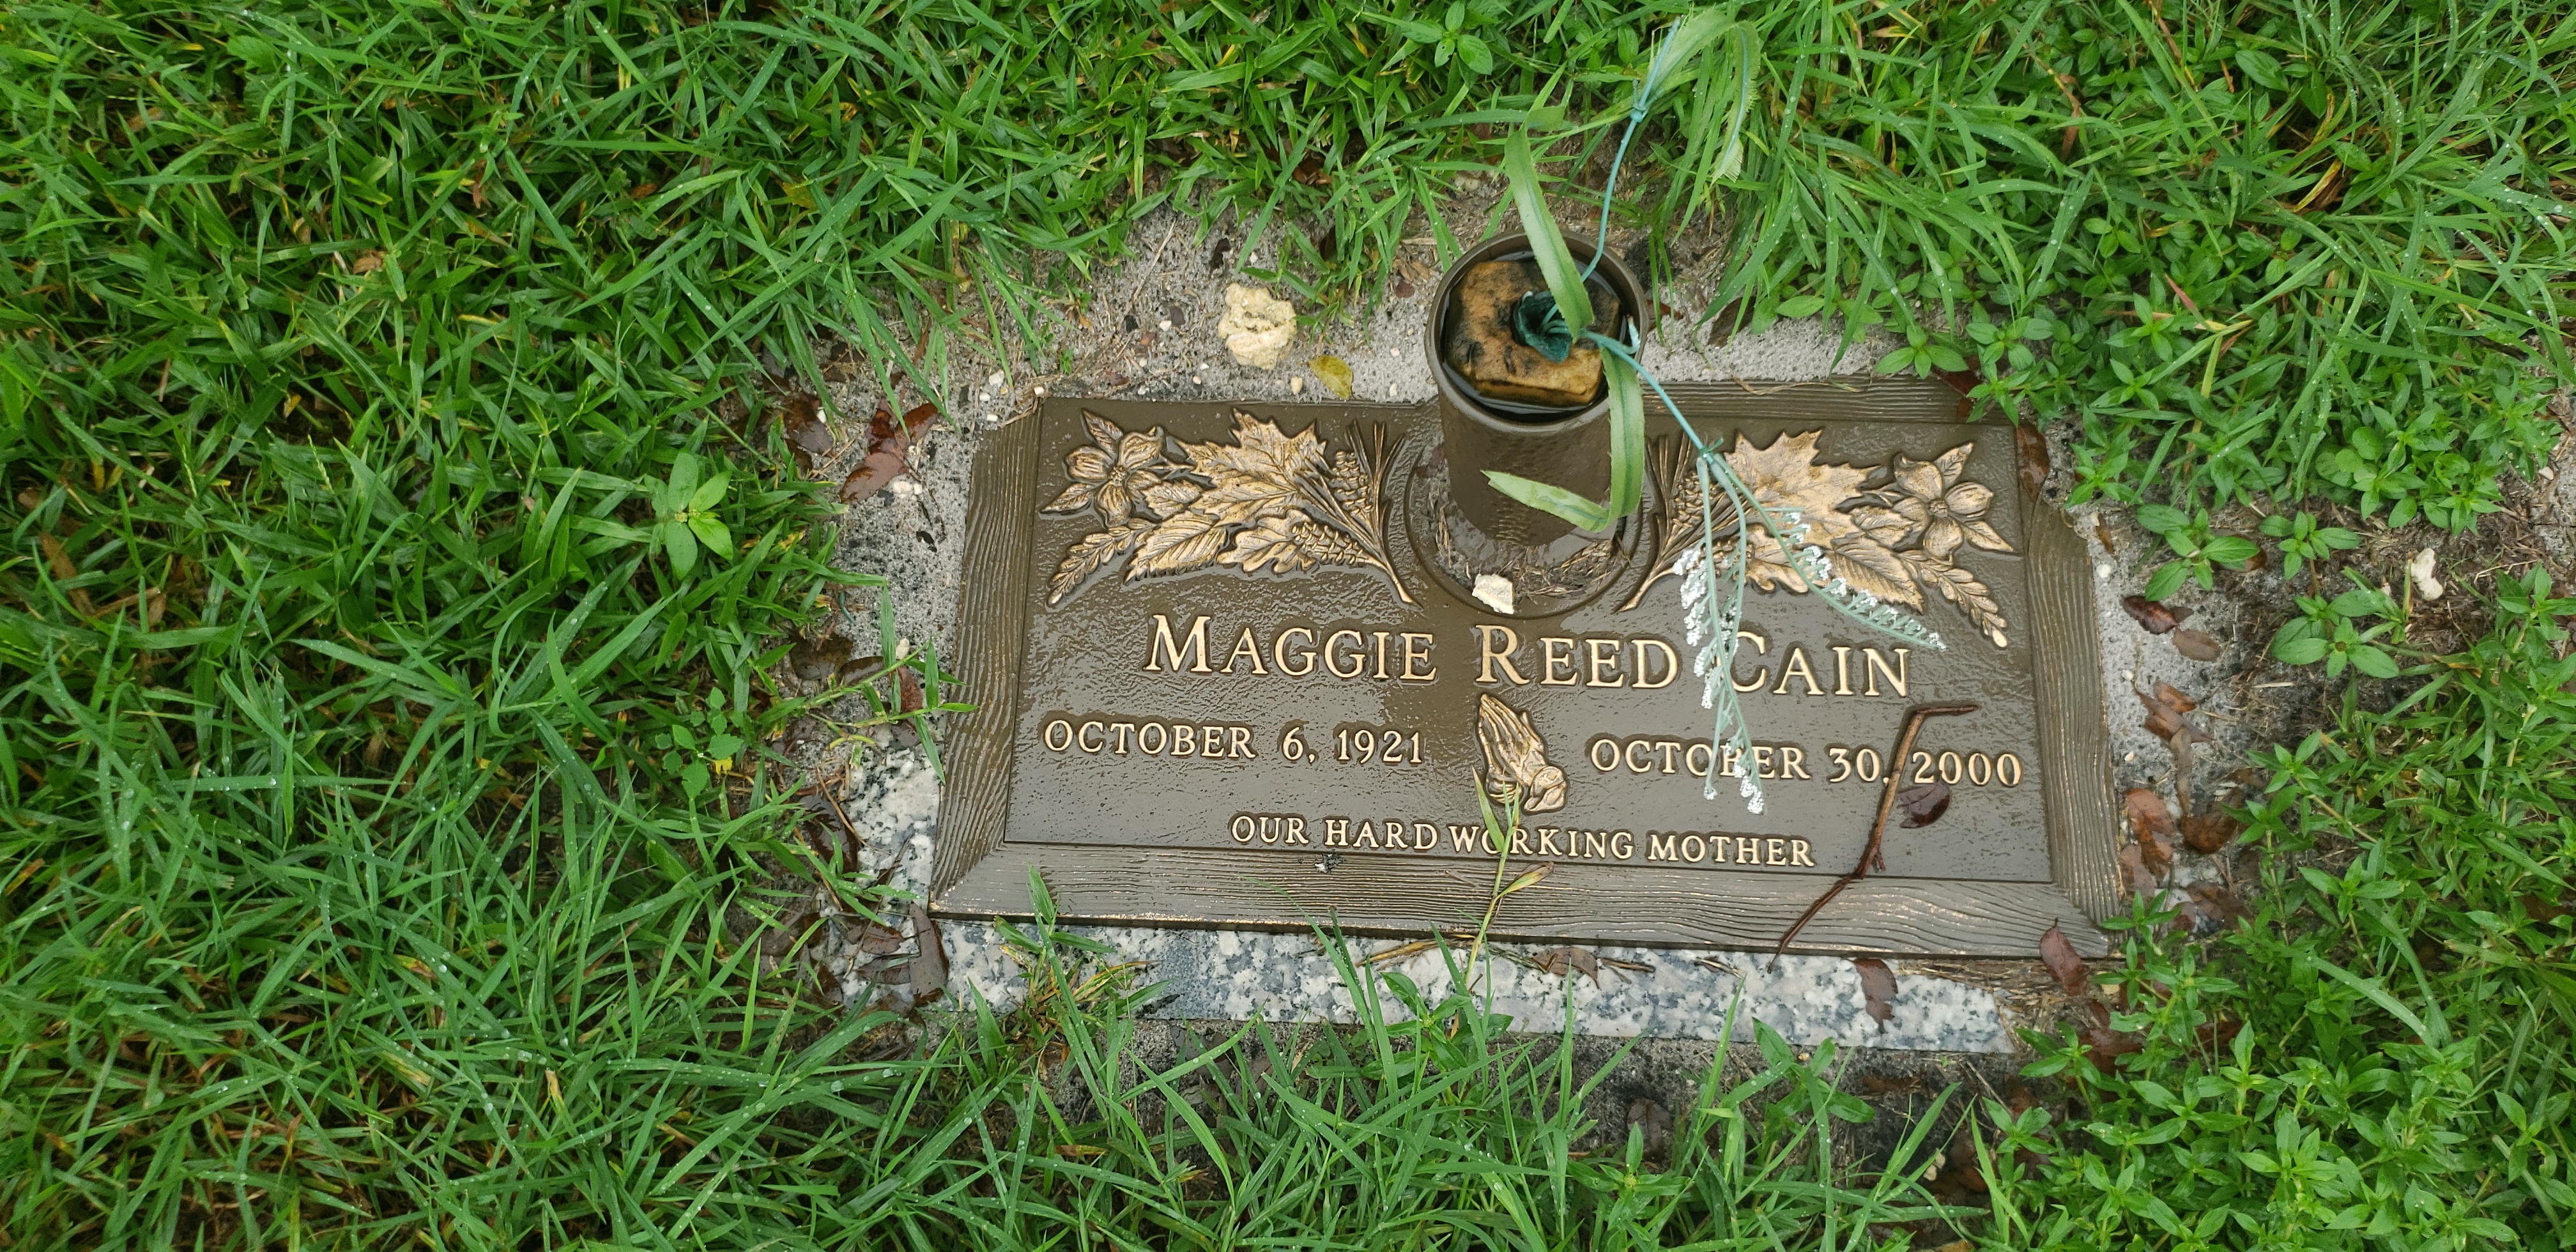 Maggie Reed Cain